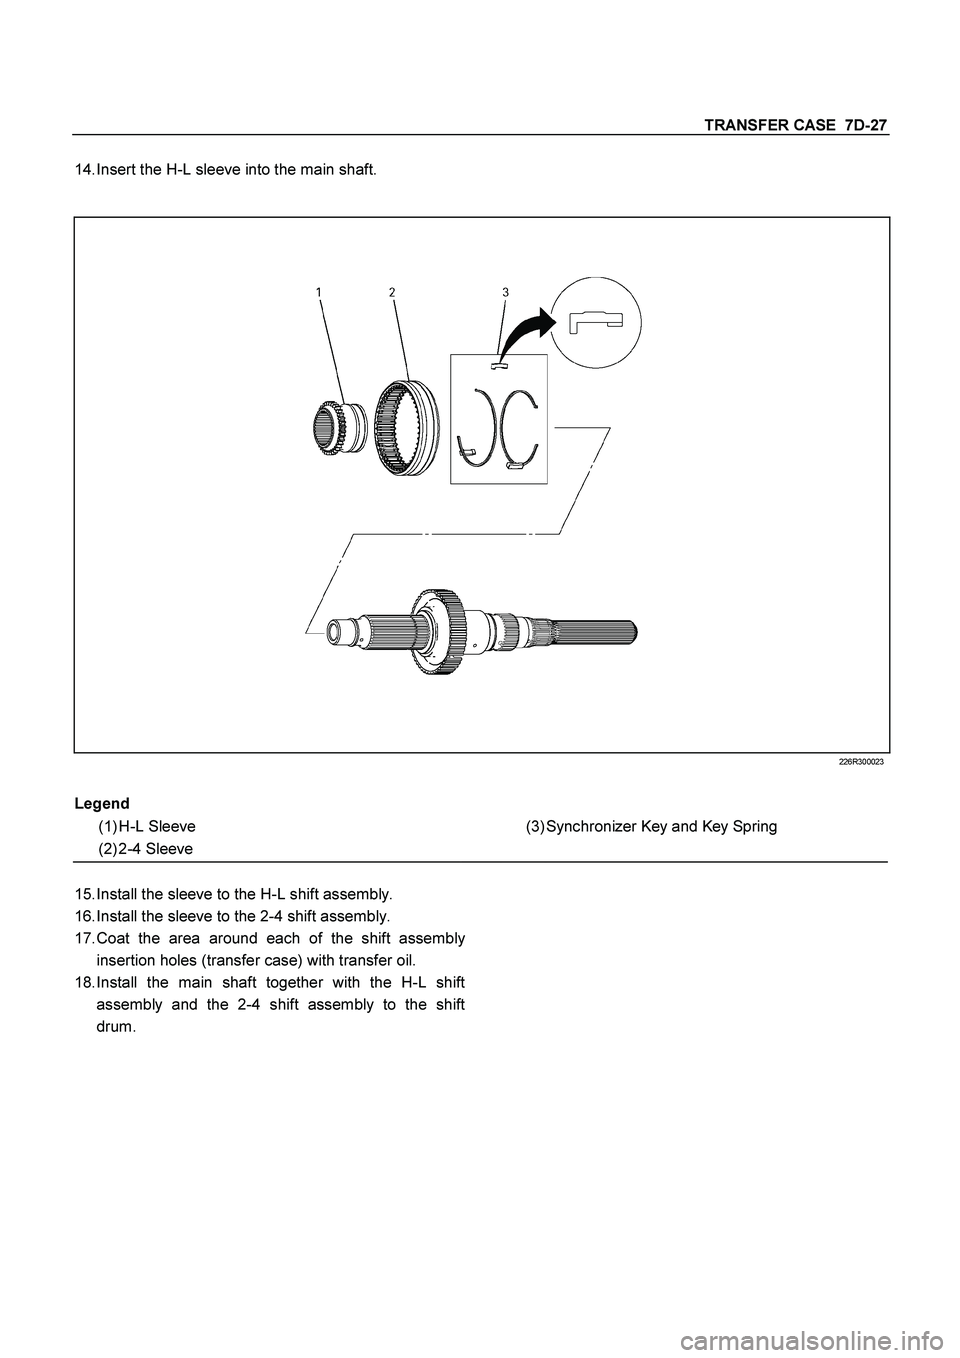 ISUZU TF SERIES 2004  Workshop Manual TRANSFER CASE  7D-27
 
14. 
Insert the H-L sleeve into the main shaft. 
  
 
 
 226R300023 
 
Legend
 
  
(1) H-L Sleeve 
 (3) Synchronizer Key and Key Spring 
(2) 2-4 Sleeve 
  
 
15. 
Install the sl